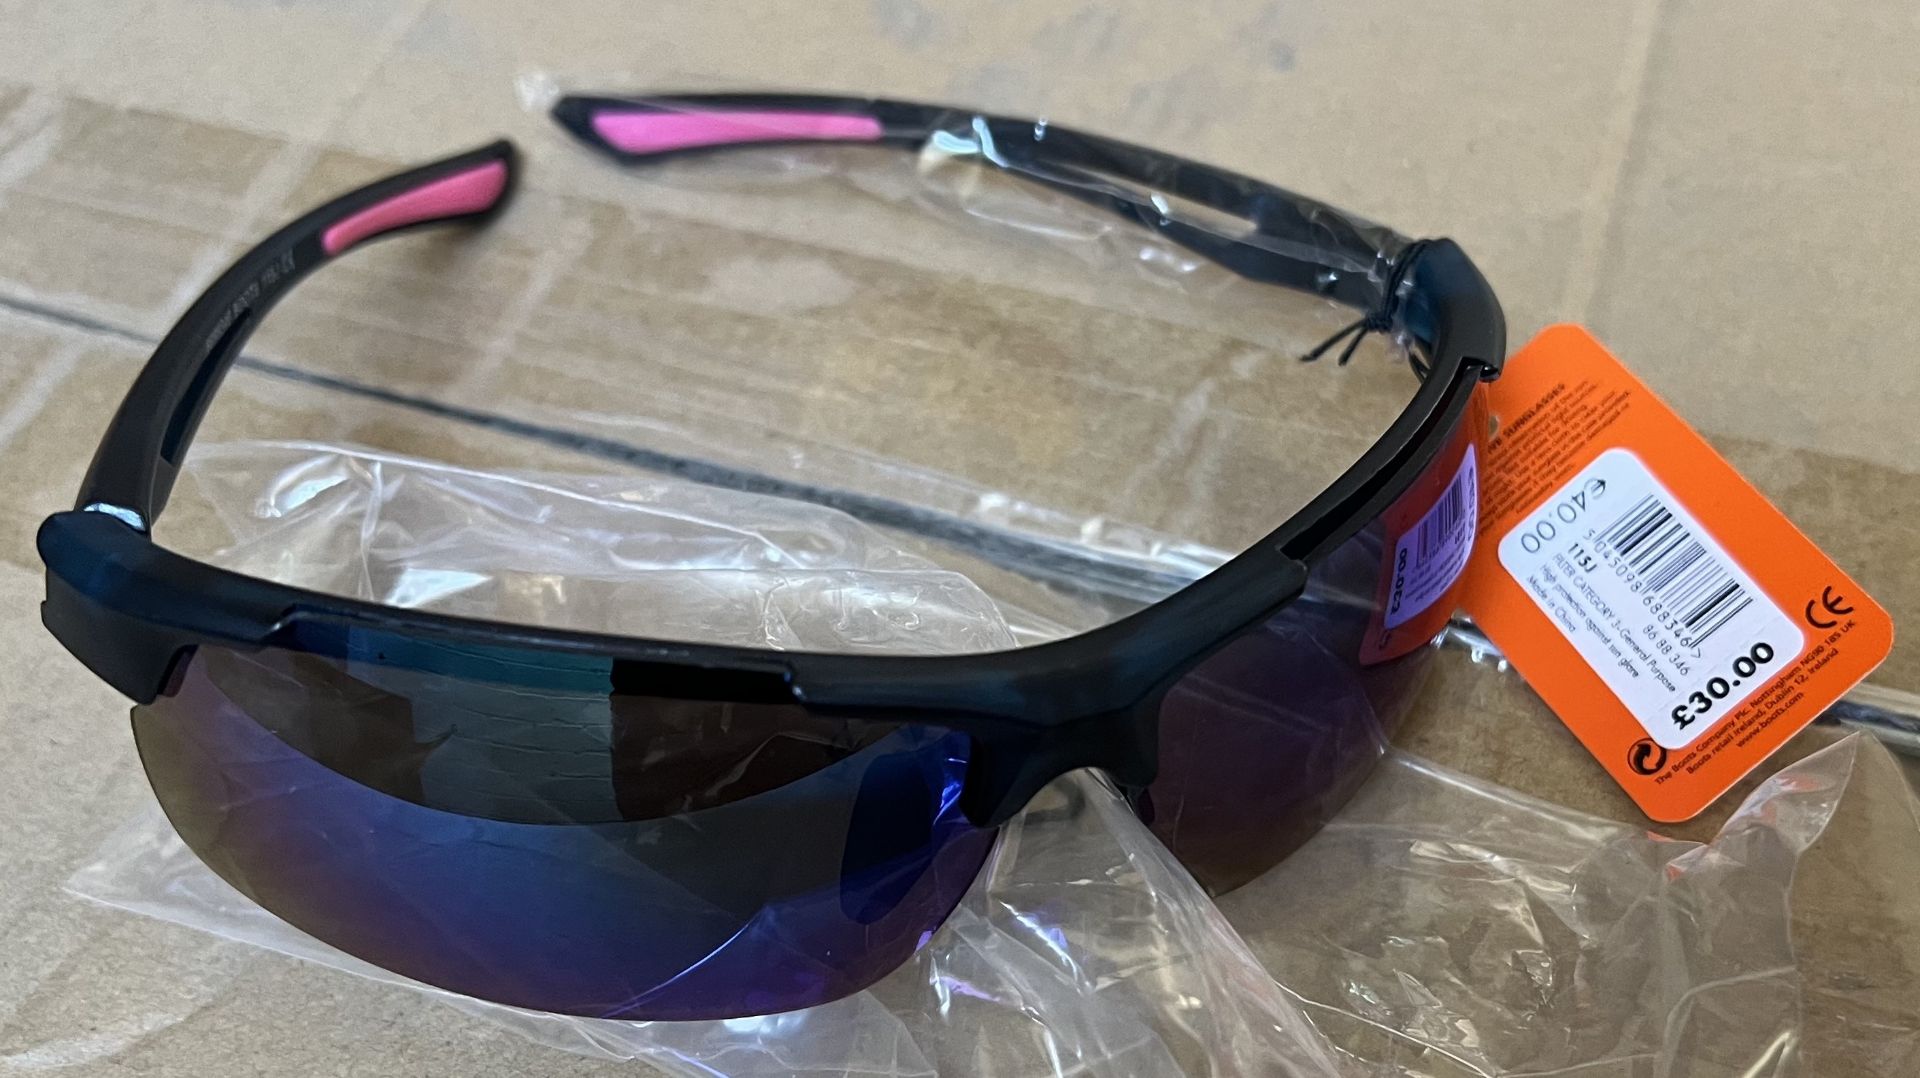 20 x Boots Active Sports Styled Sunglasses 100% UVA - (NEW) - BOOTS RRP Â£500 !